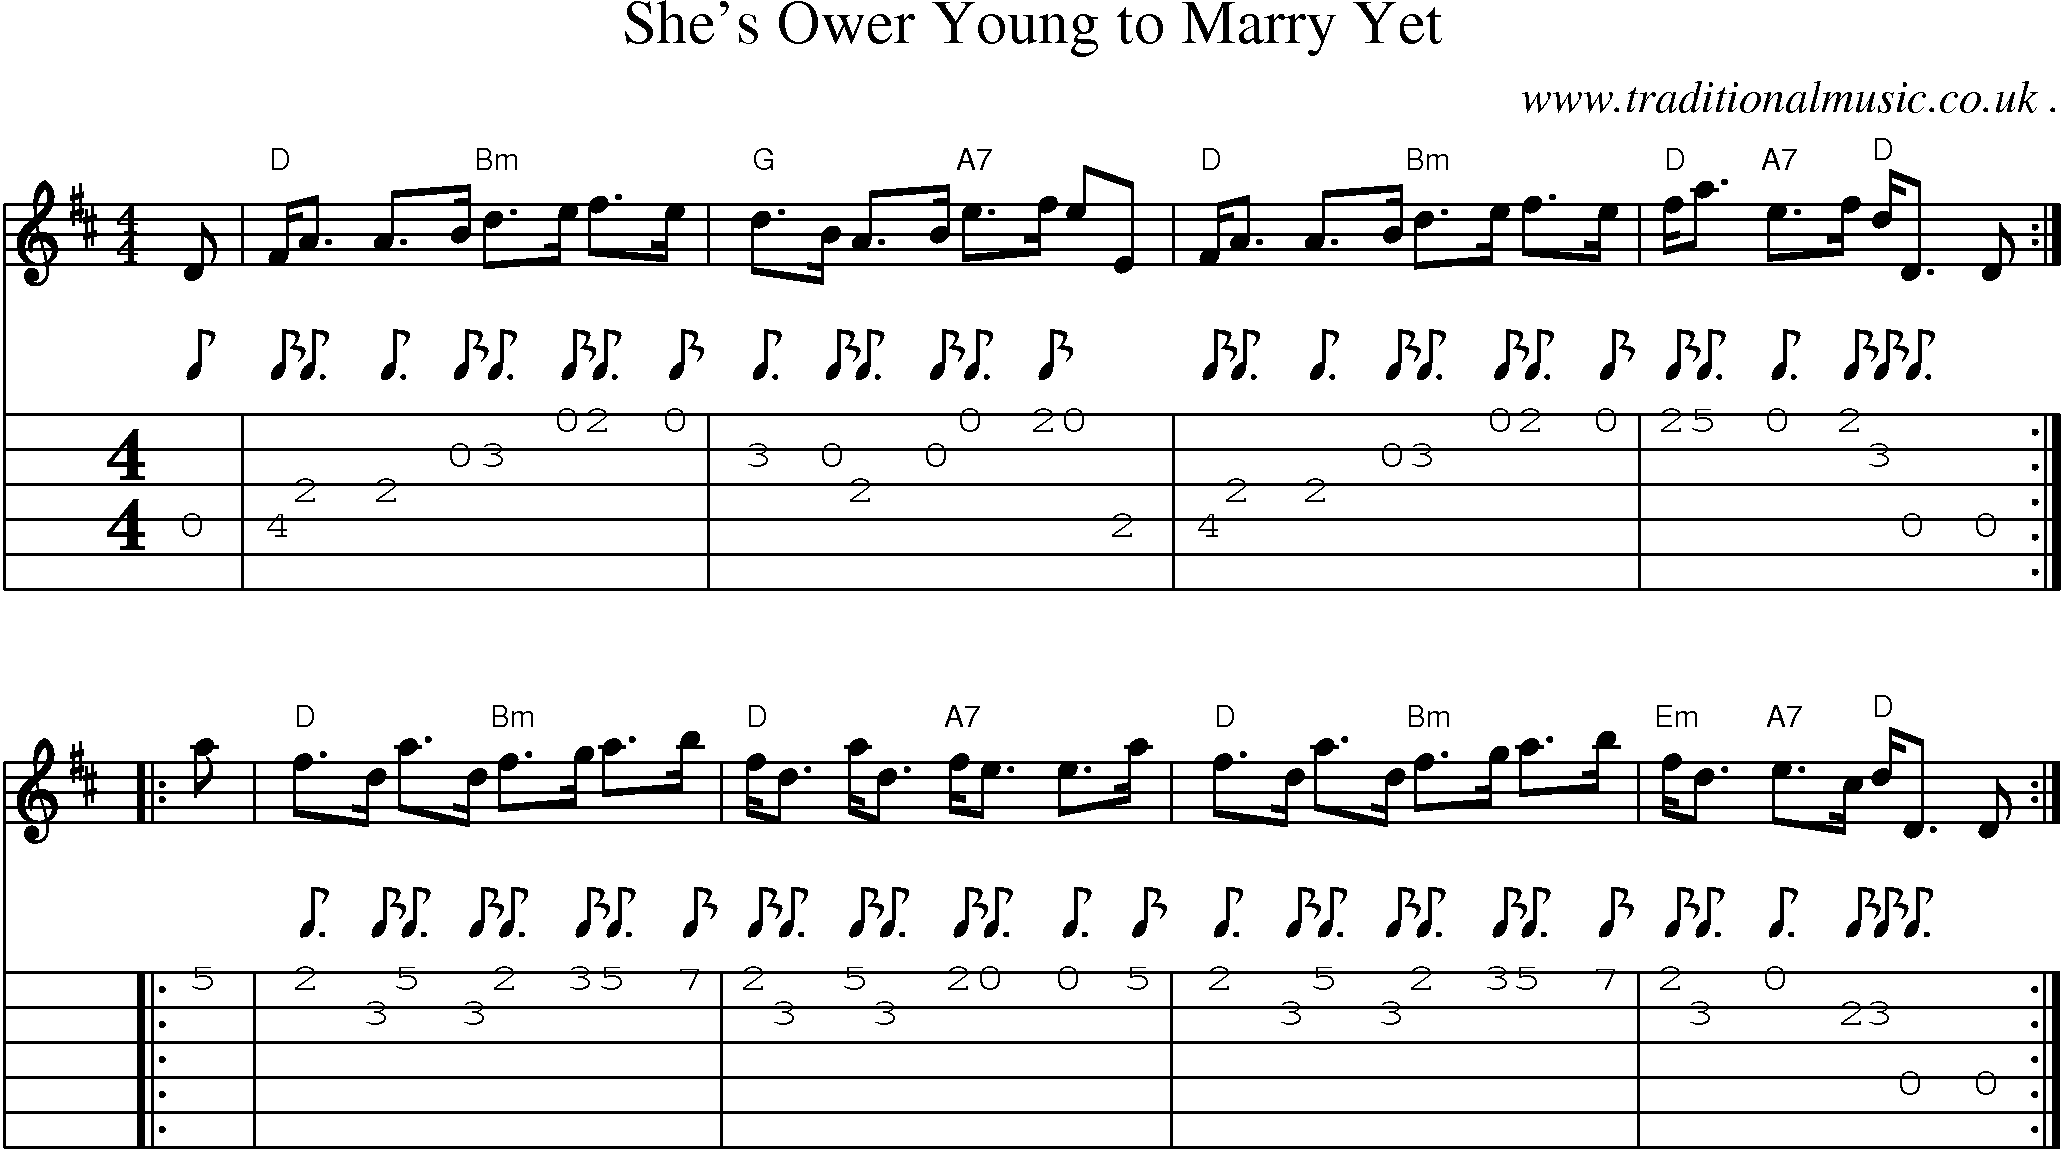 Sheet-music  score, Chords and Guitar Tabs for Shes Ower Young To Marry Yet